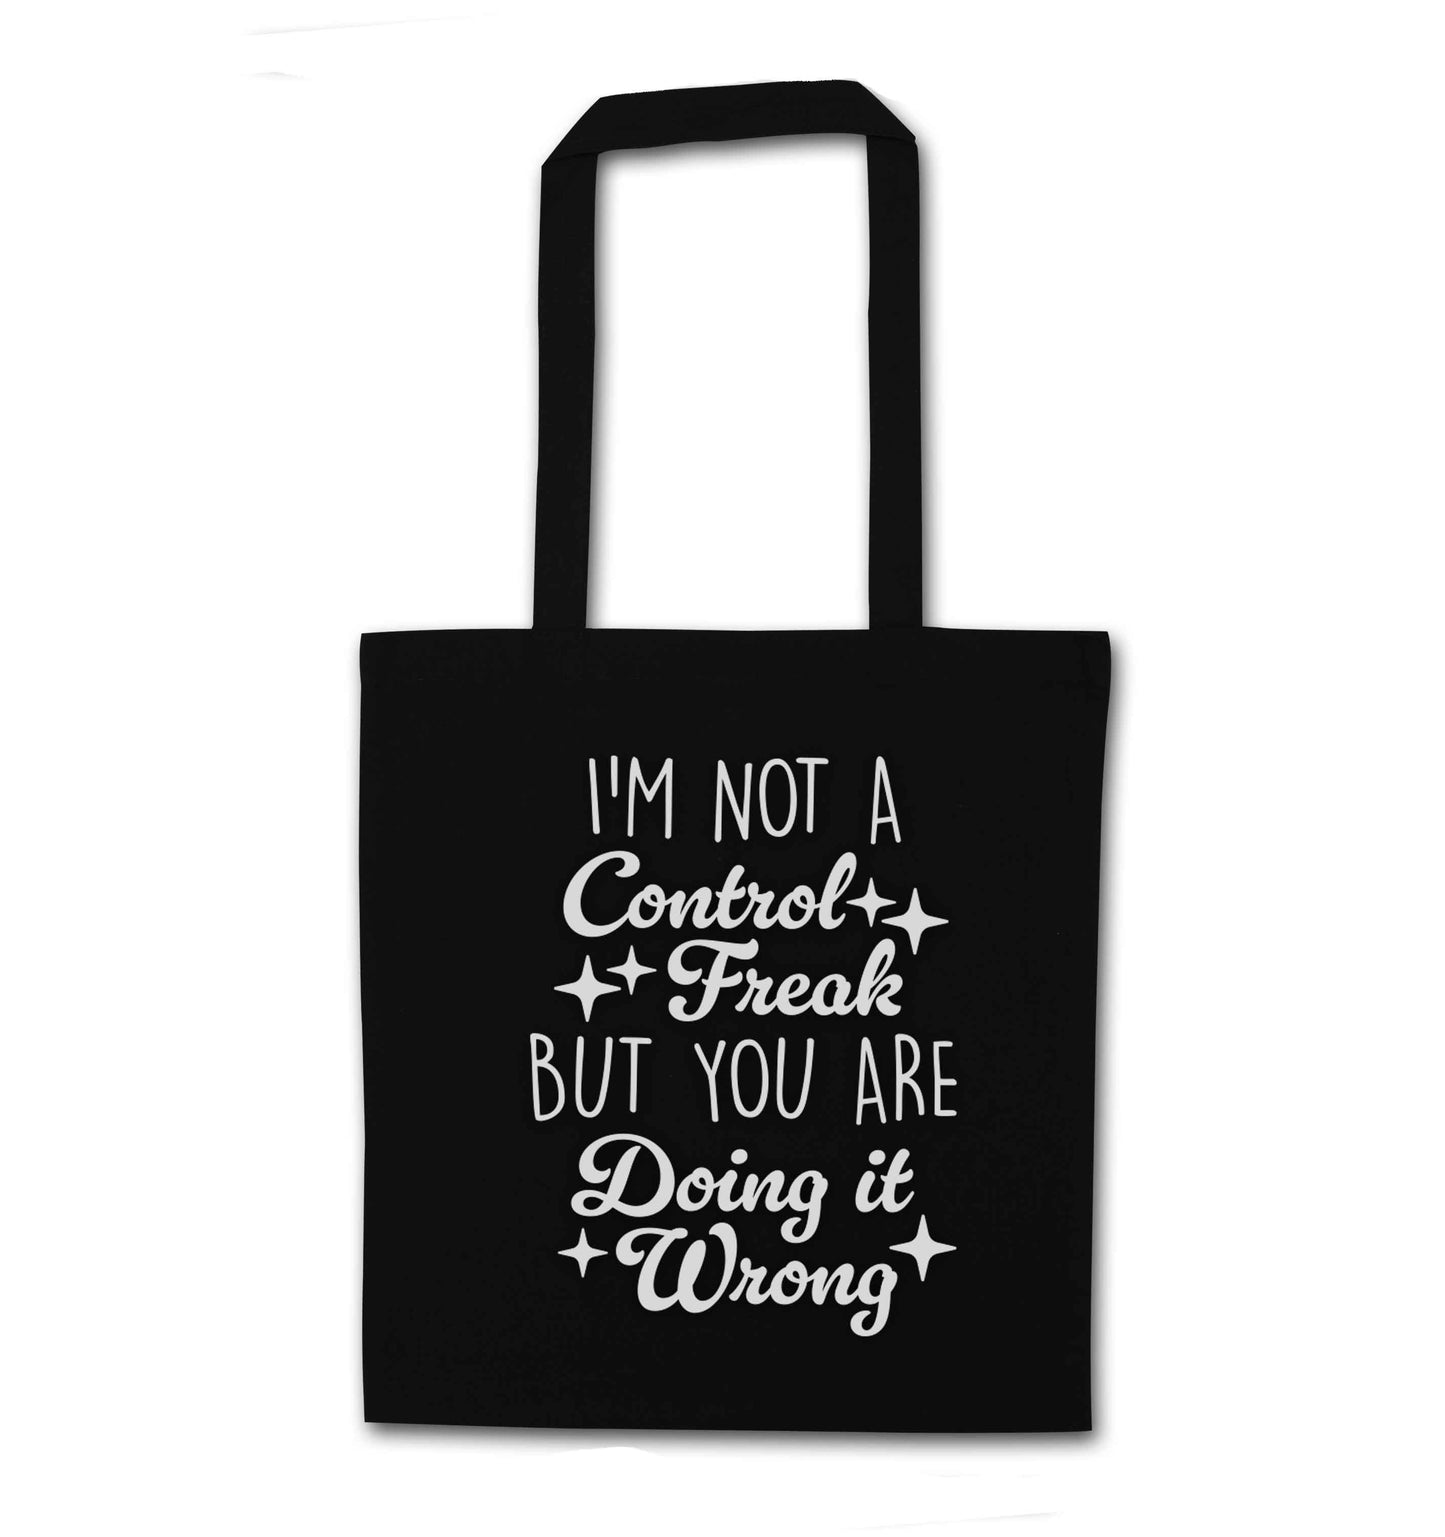 I'm not a control freak but you are doing it wrong black tote bag